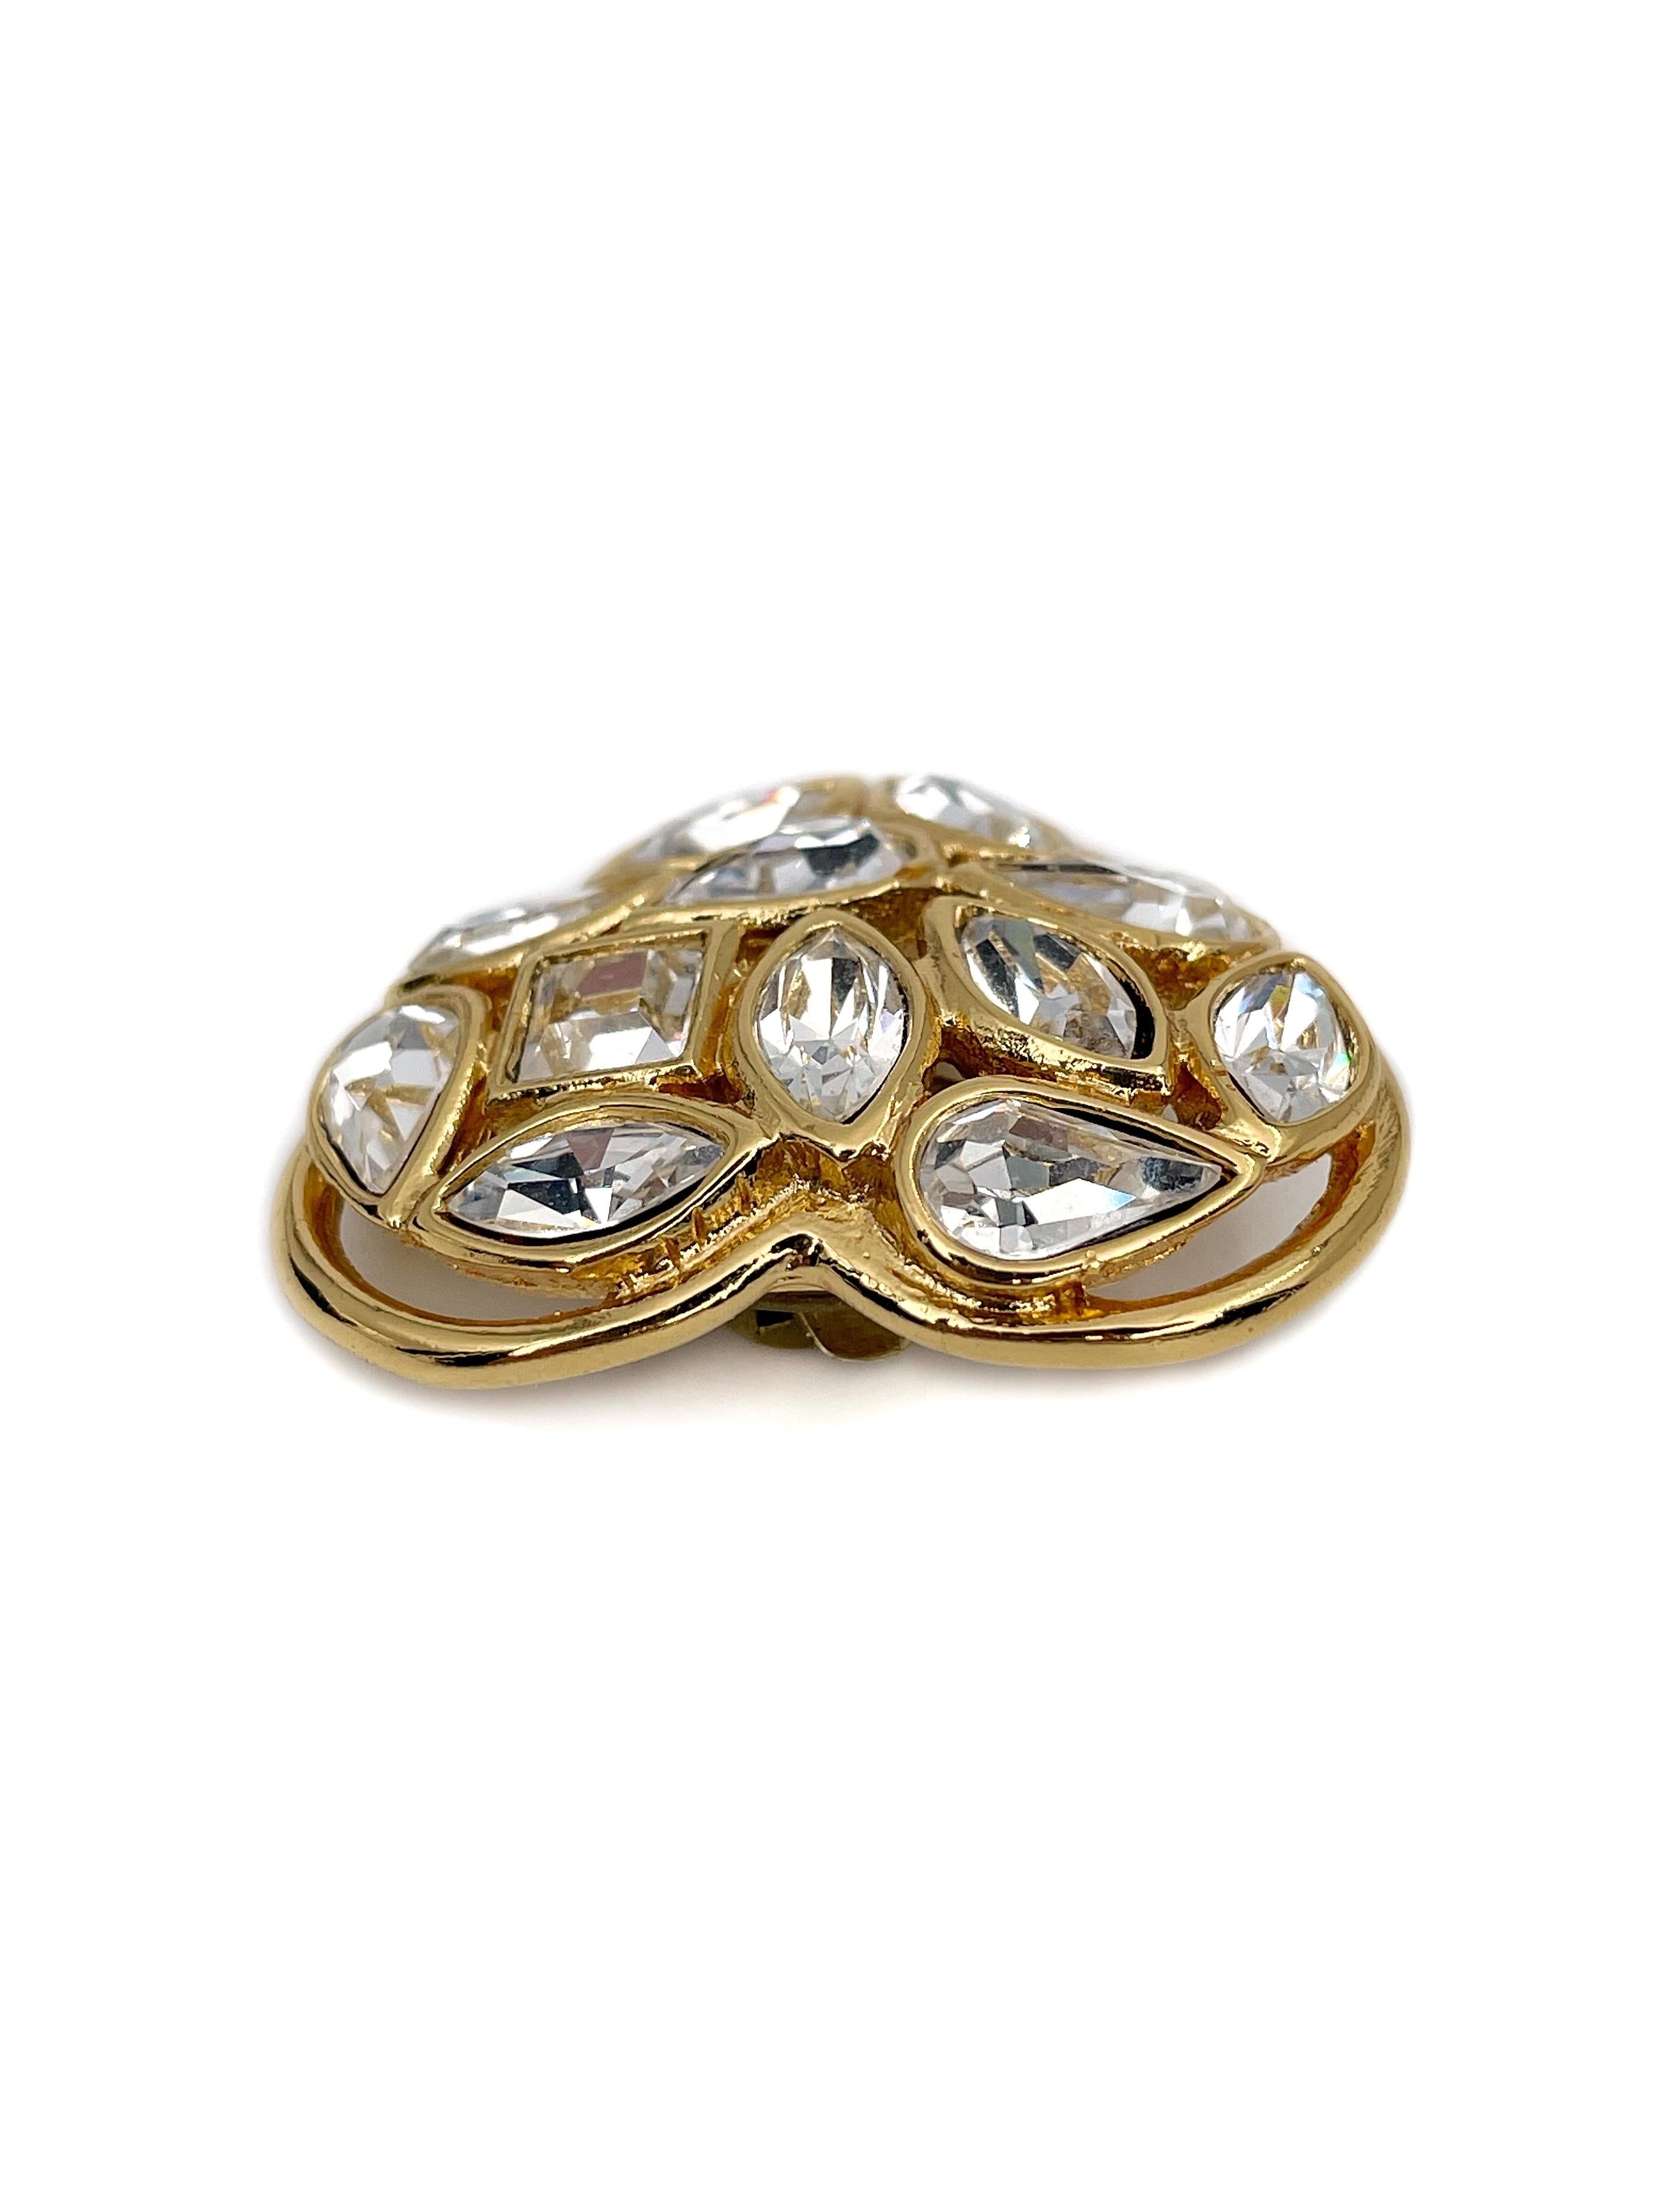 This is a gold tone vintage heart pin designed by Robert Goosens for YSL in 1990’s. This piece is gold plated. It features clear shiny rhinestones.

Signed: 